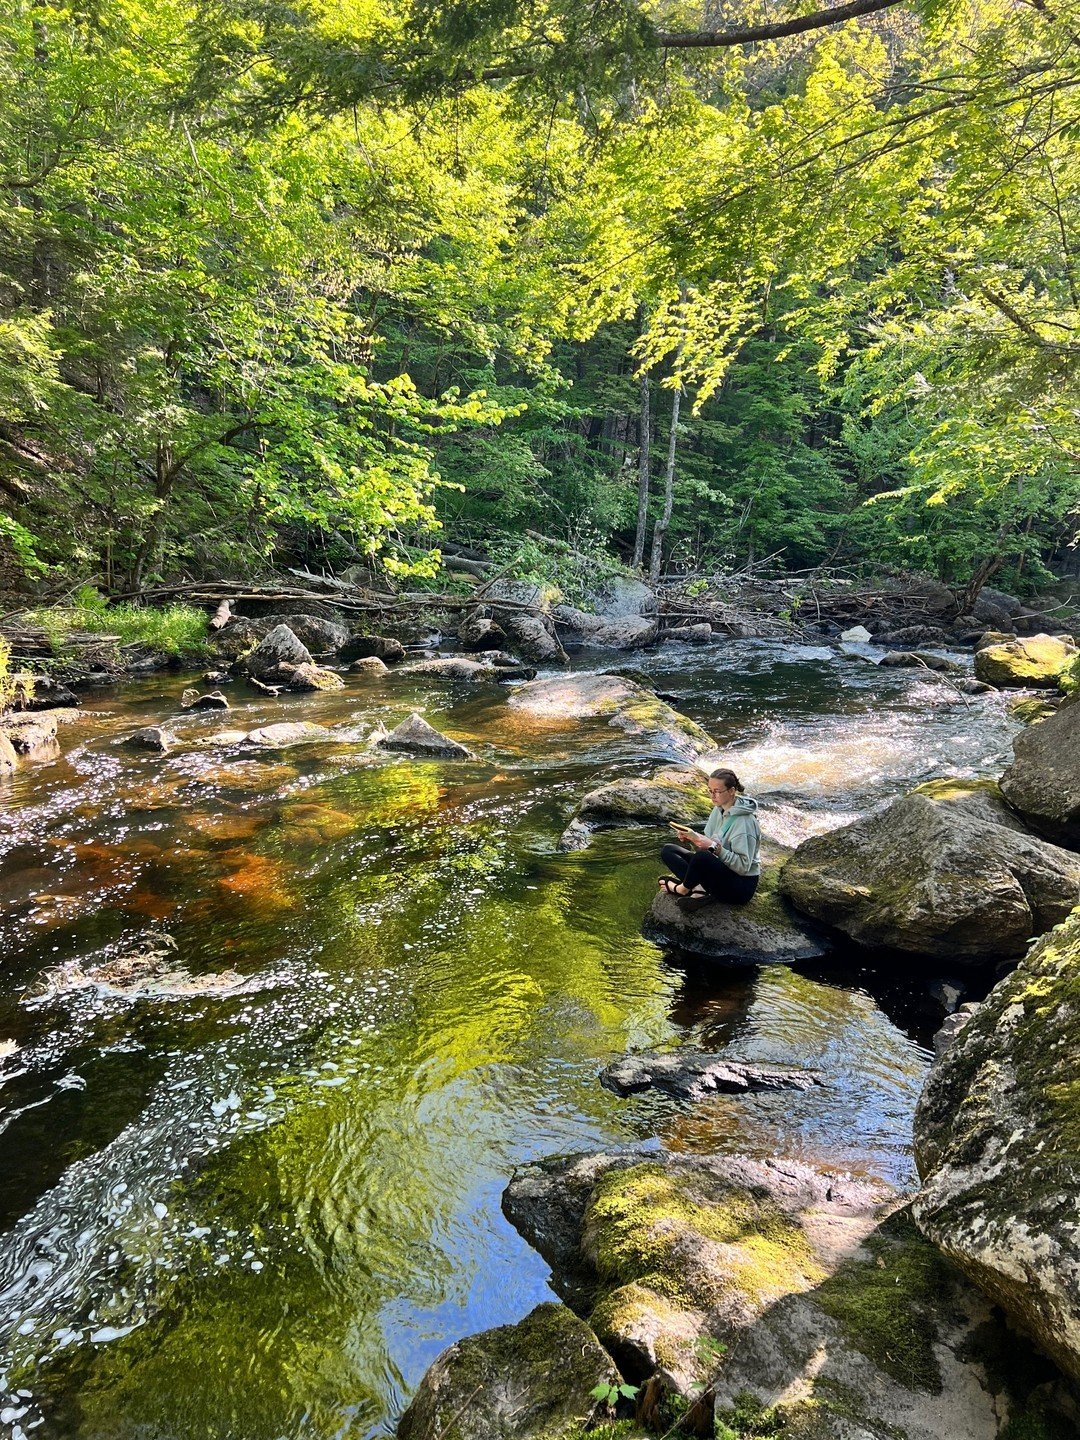 Don't miss out on the final opportunity to secure your spot for the May New Hampshire yoga, art, and nature retreat!!​​​​​​​​
​​​​​​​​
Immerse yourself in the serene beauty of nature as you deepen your yoga practice and explore your creativity. This 